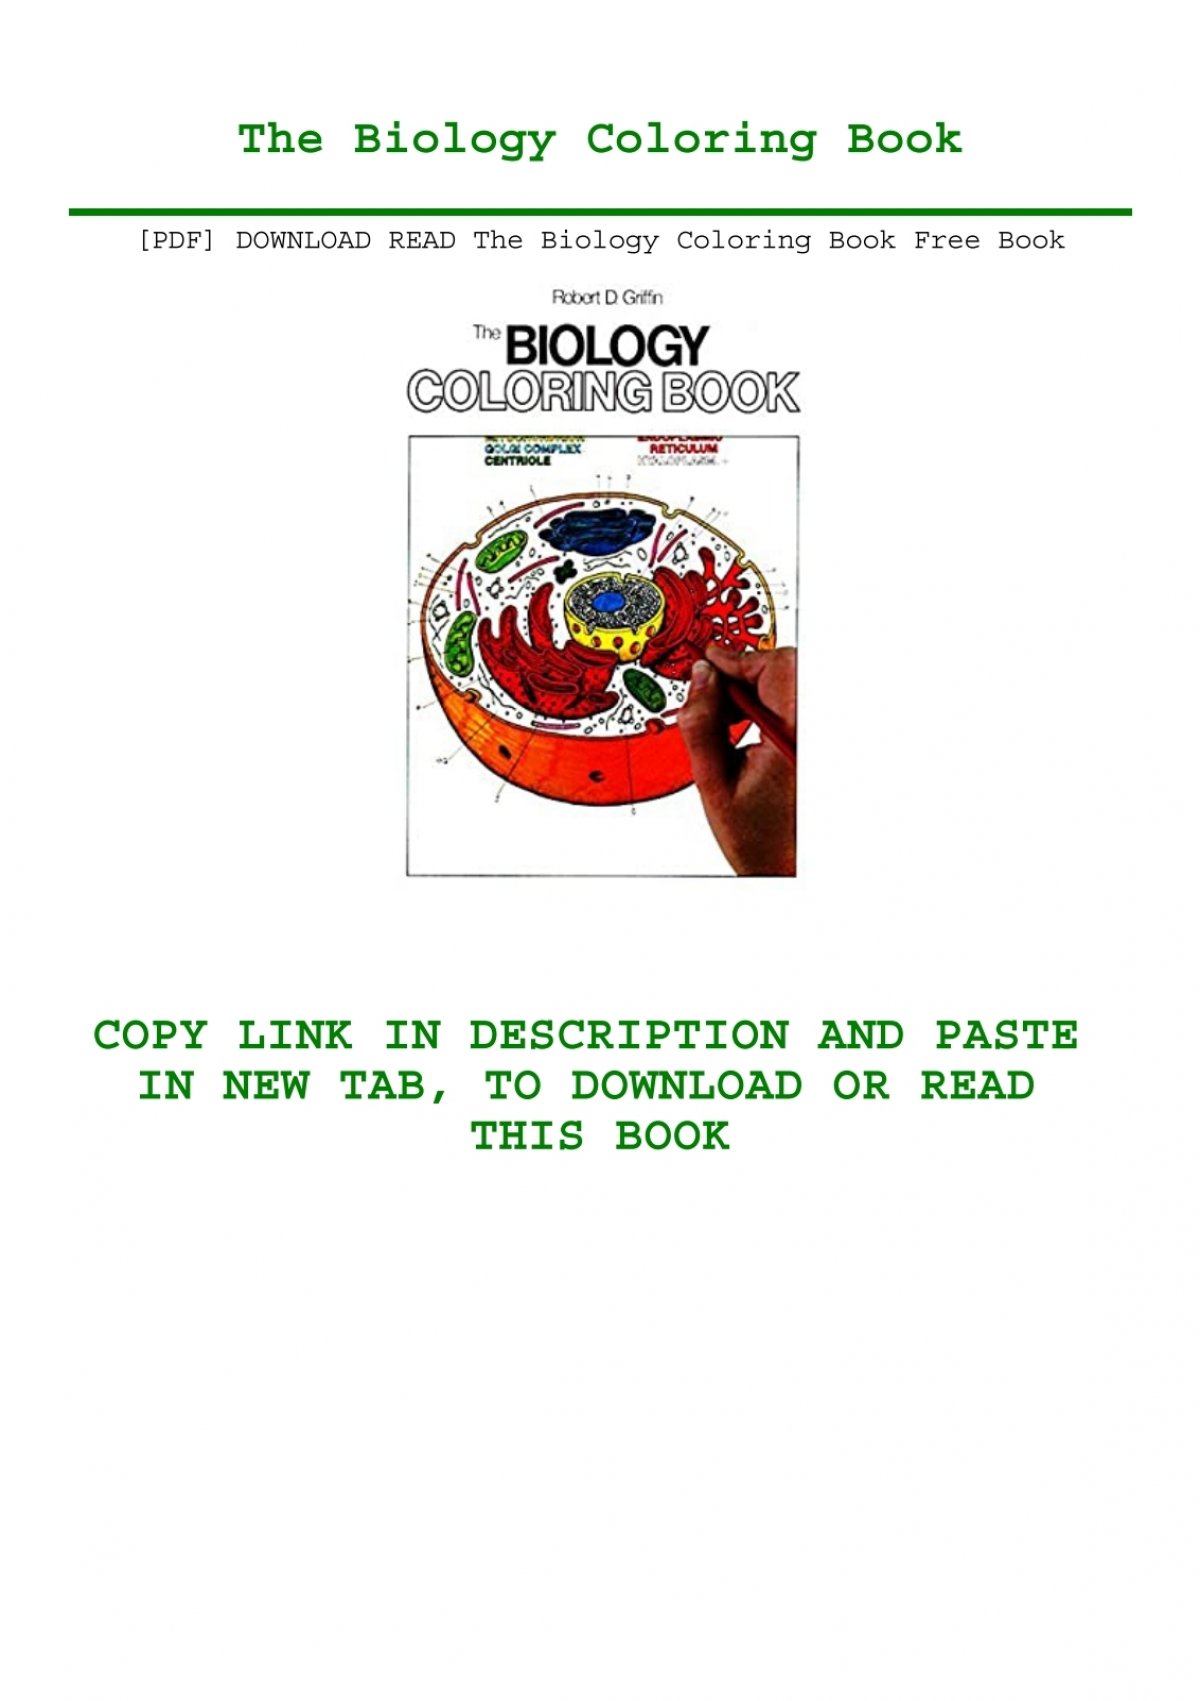 Download Pdf Download Read The Biology Coloring Book Free Book